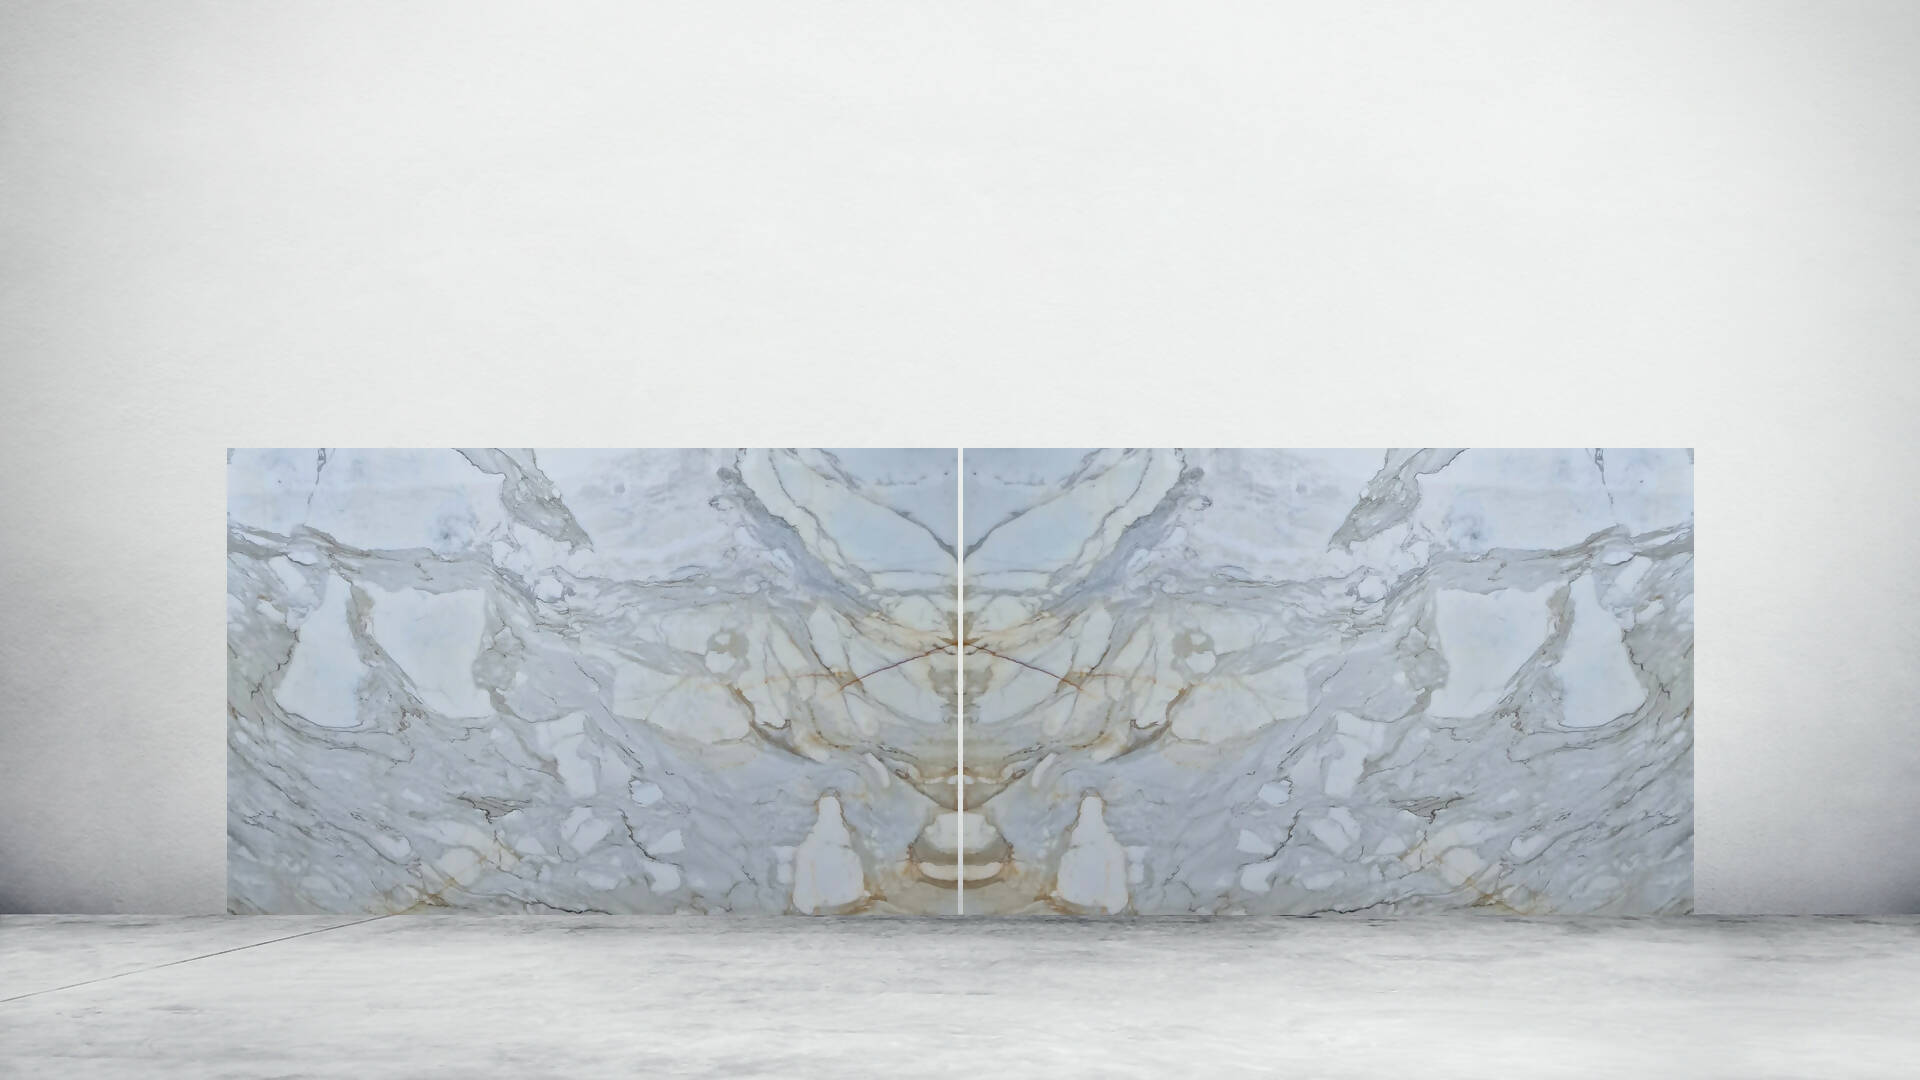 CALACATTA ORO BOOKMATCHMARBLE,Marble,Develli,www.work-tops.com